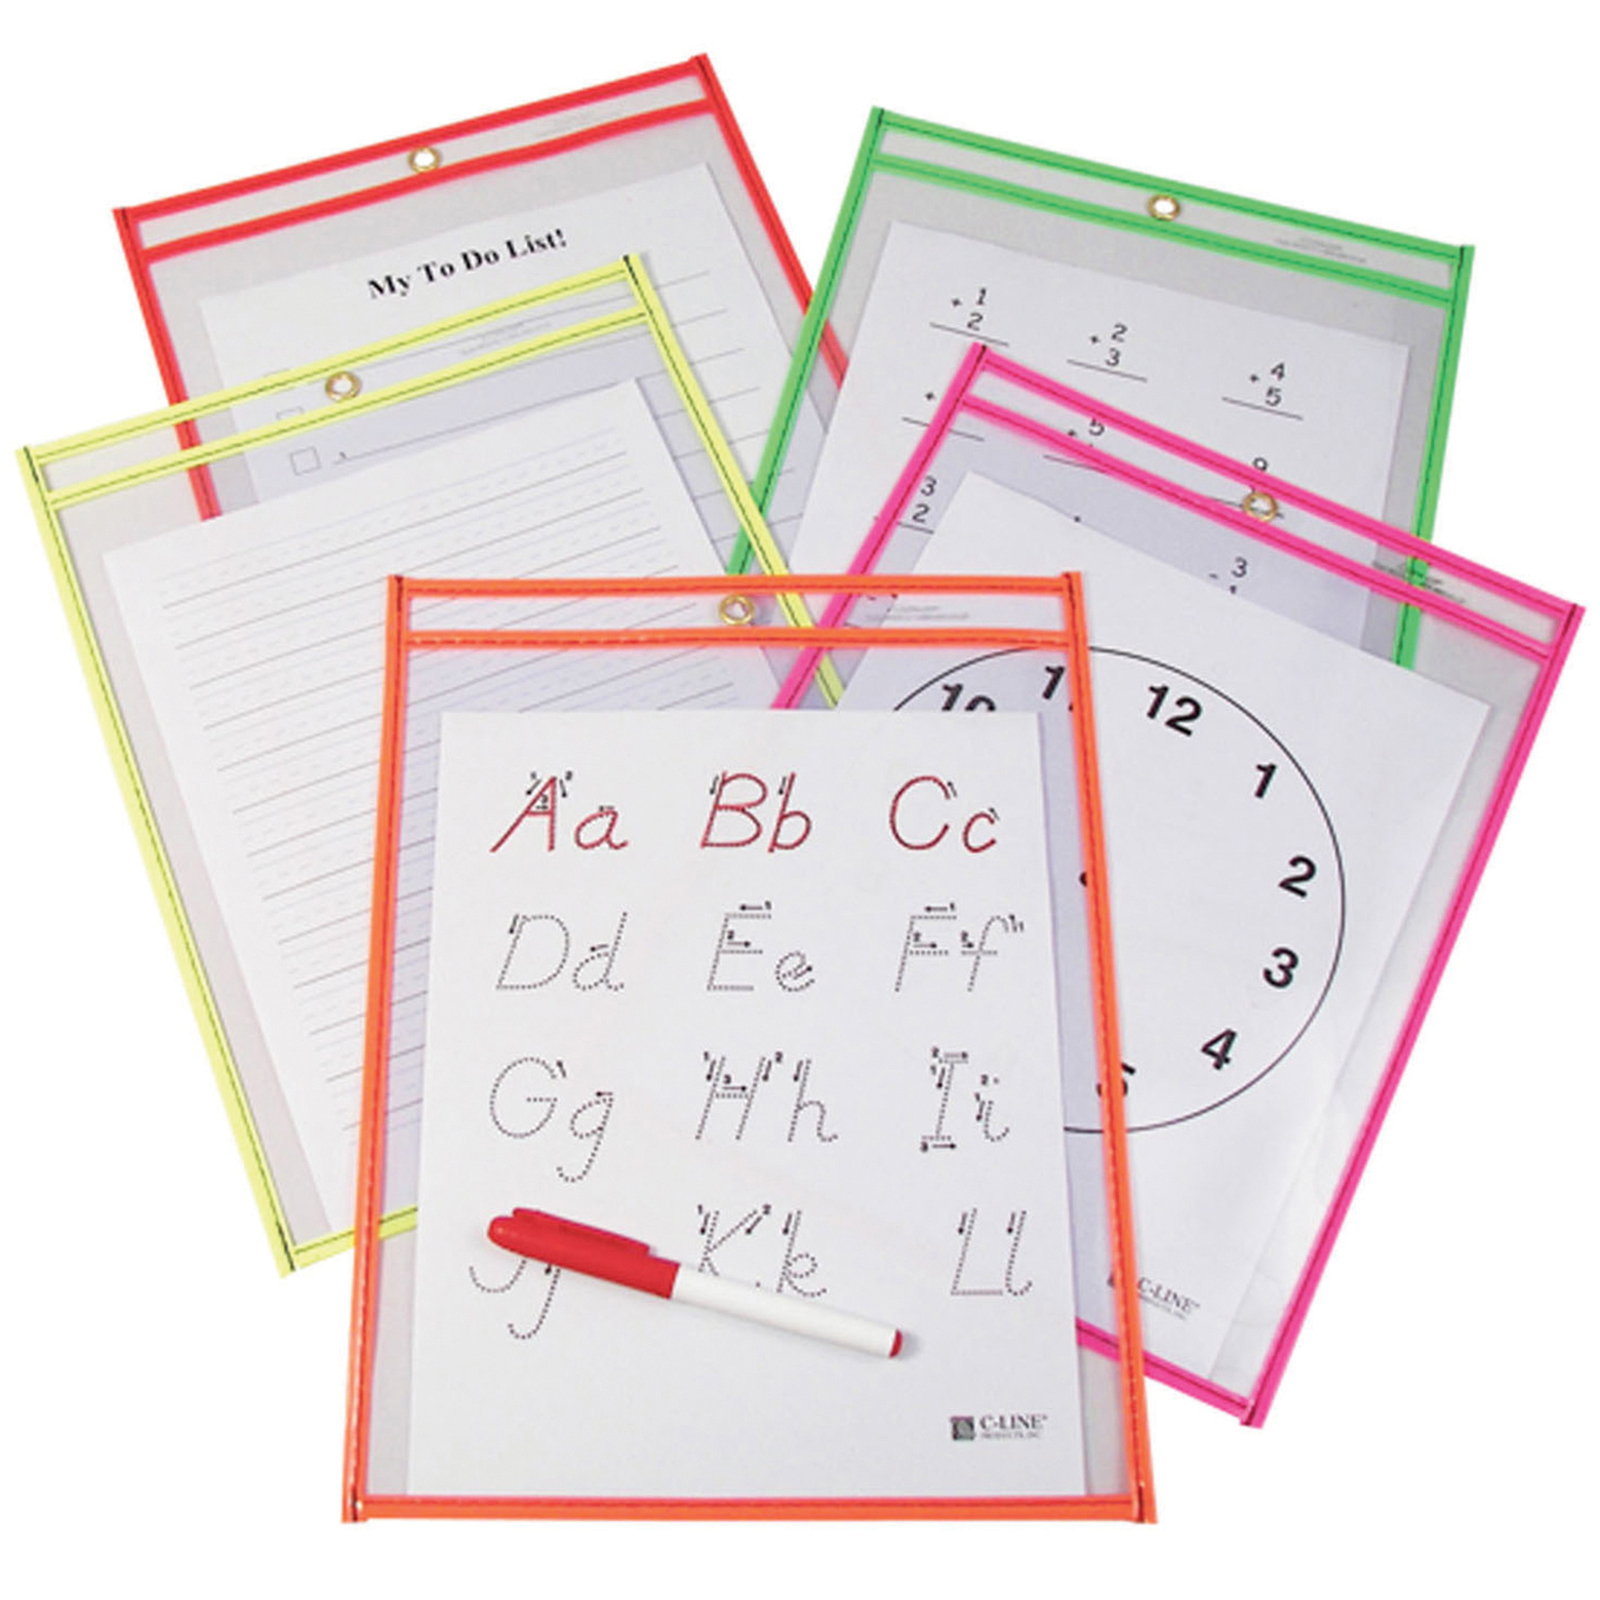 Reusable Dry Erase Pockets, Neon Colors, 9 x 12, Pack of 10